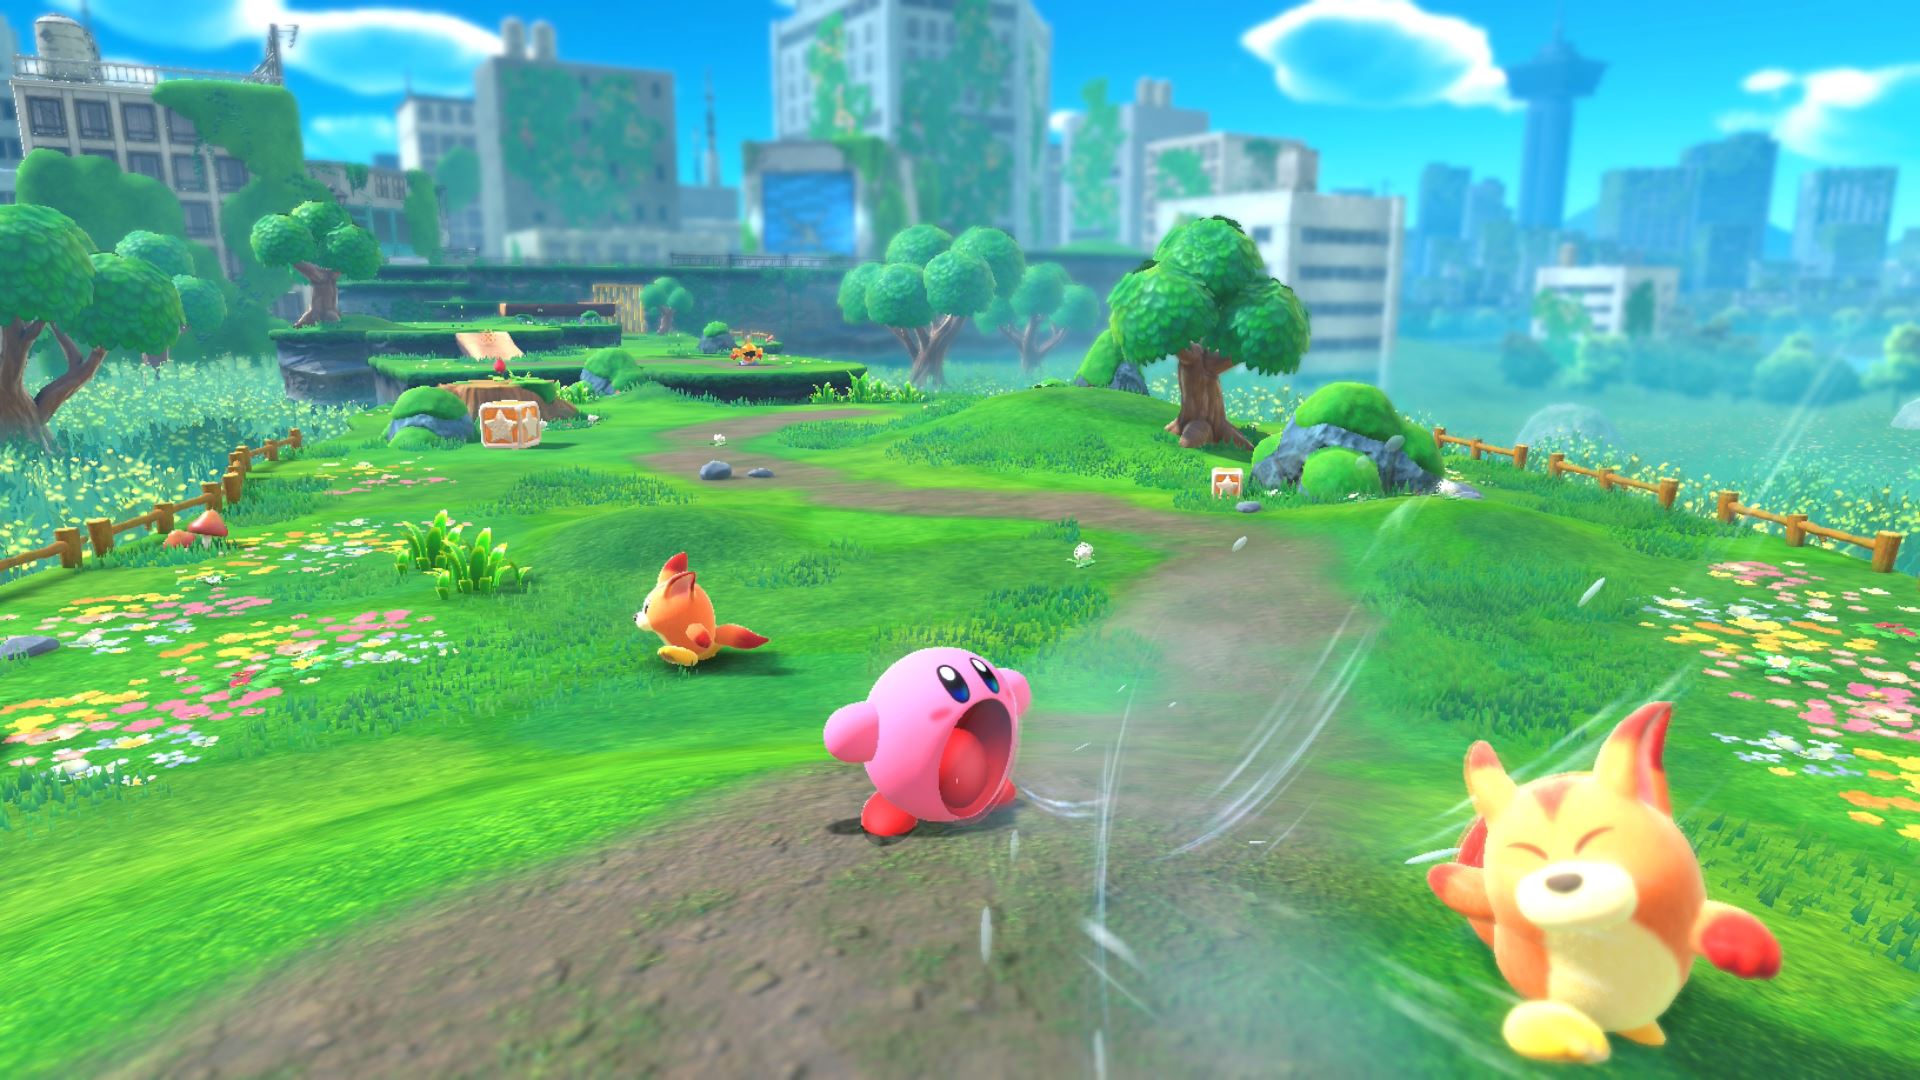 Kirby and the Forgotten Land's Kirby inhaling